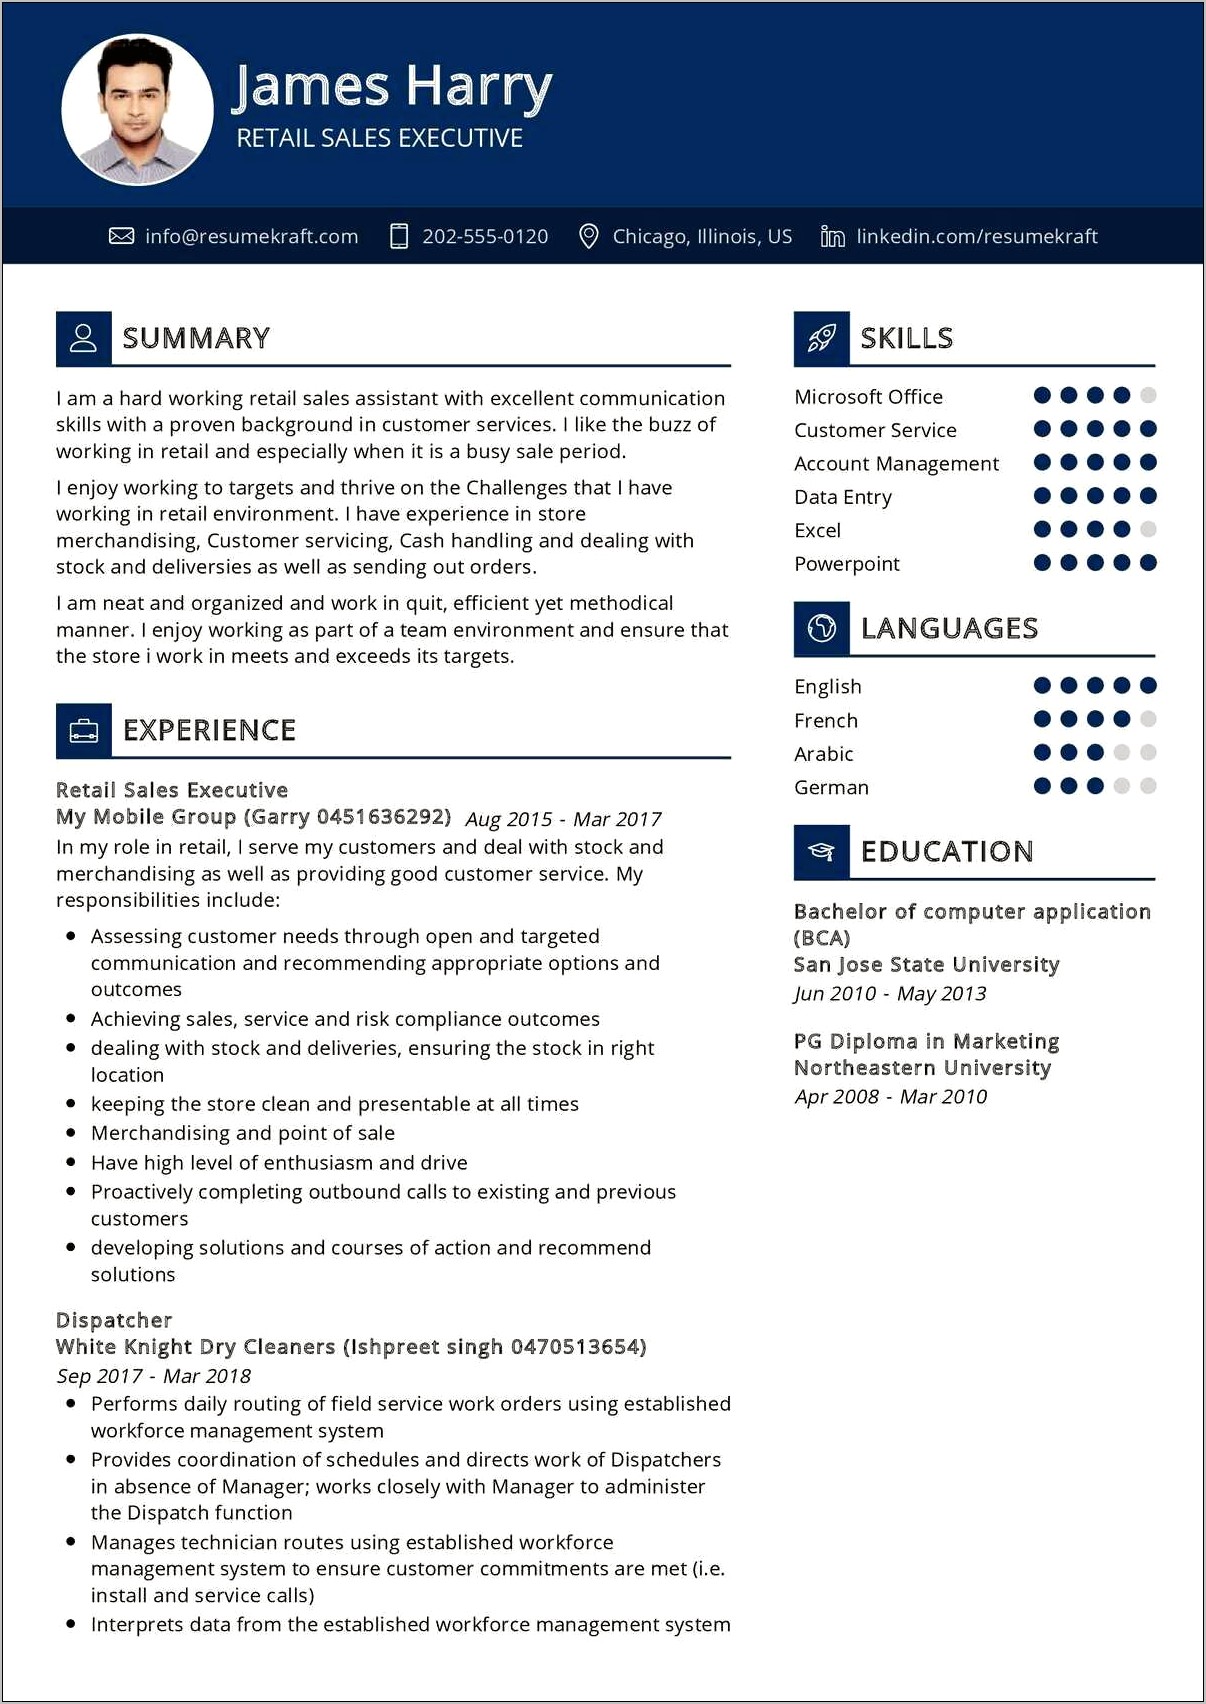 Resume Skills For Retail Assistant